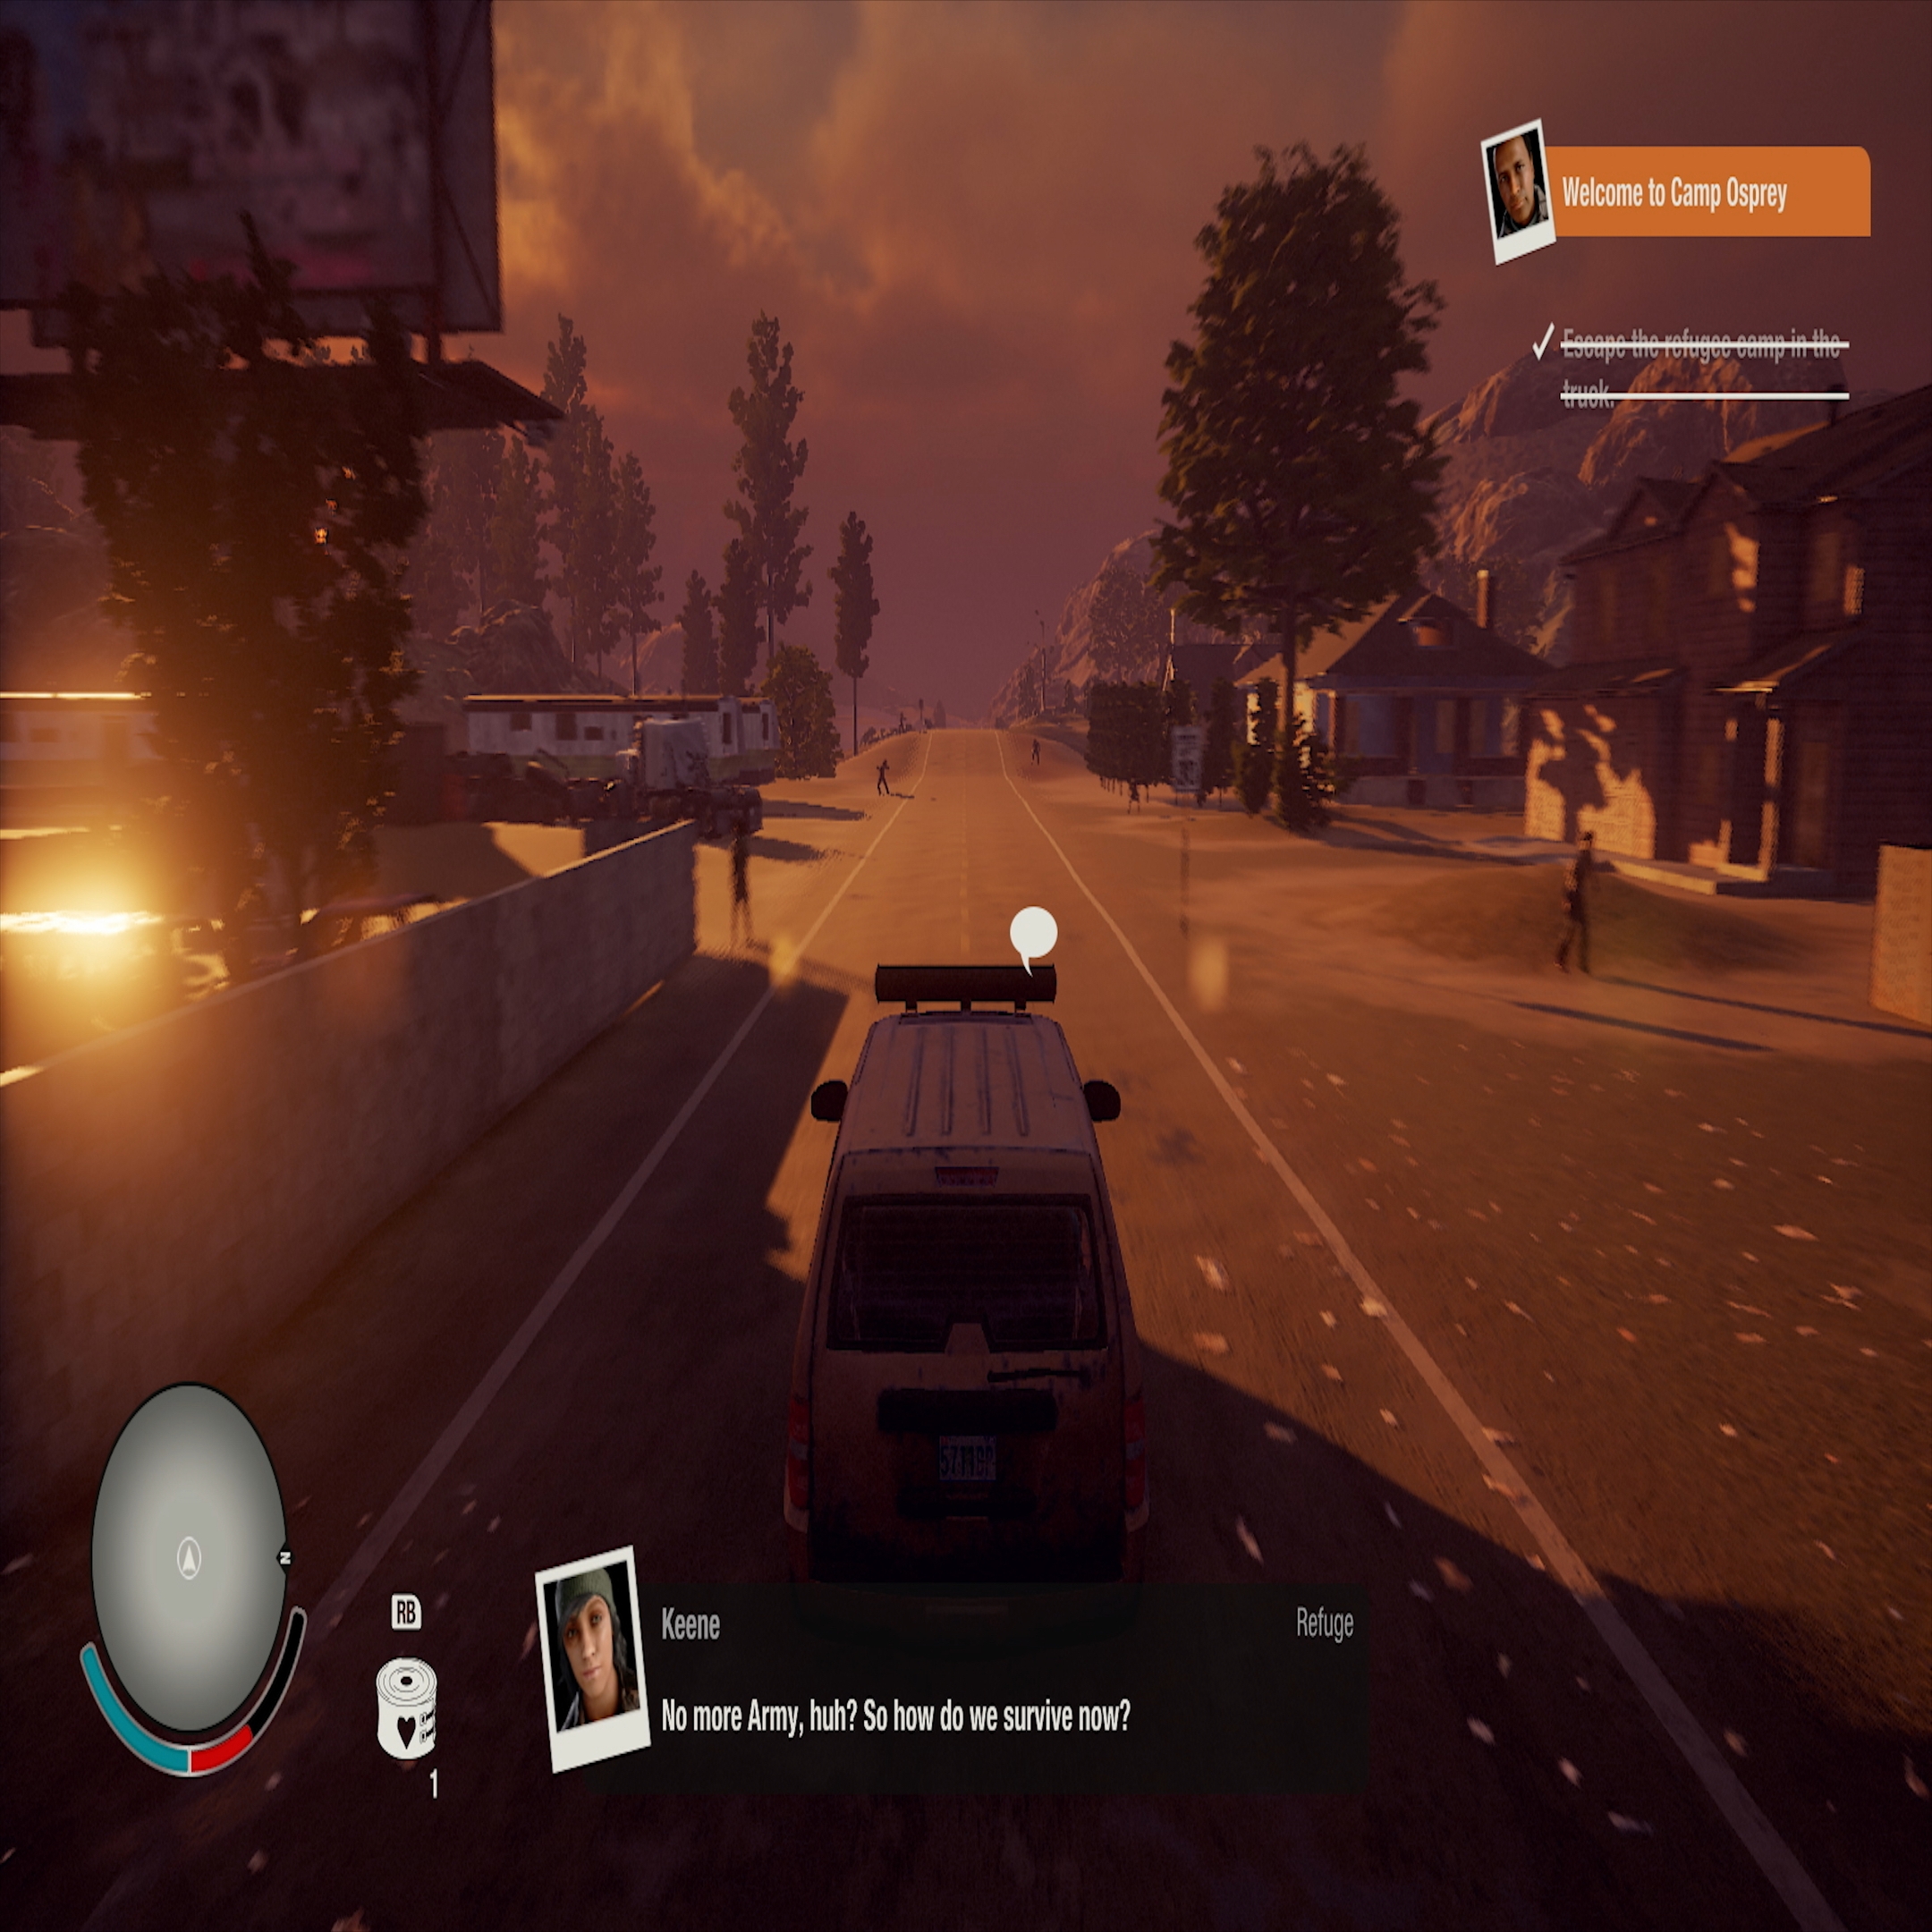 State of Decay 2: Xbox One X looks better than S - but frame-rate